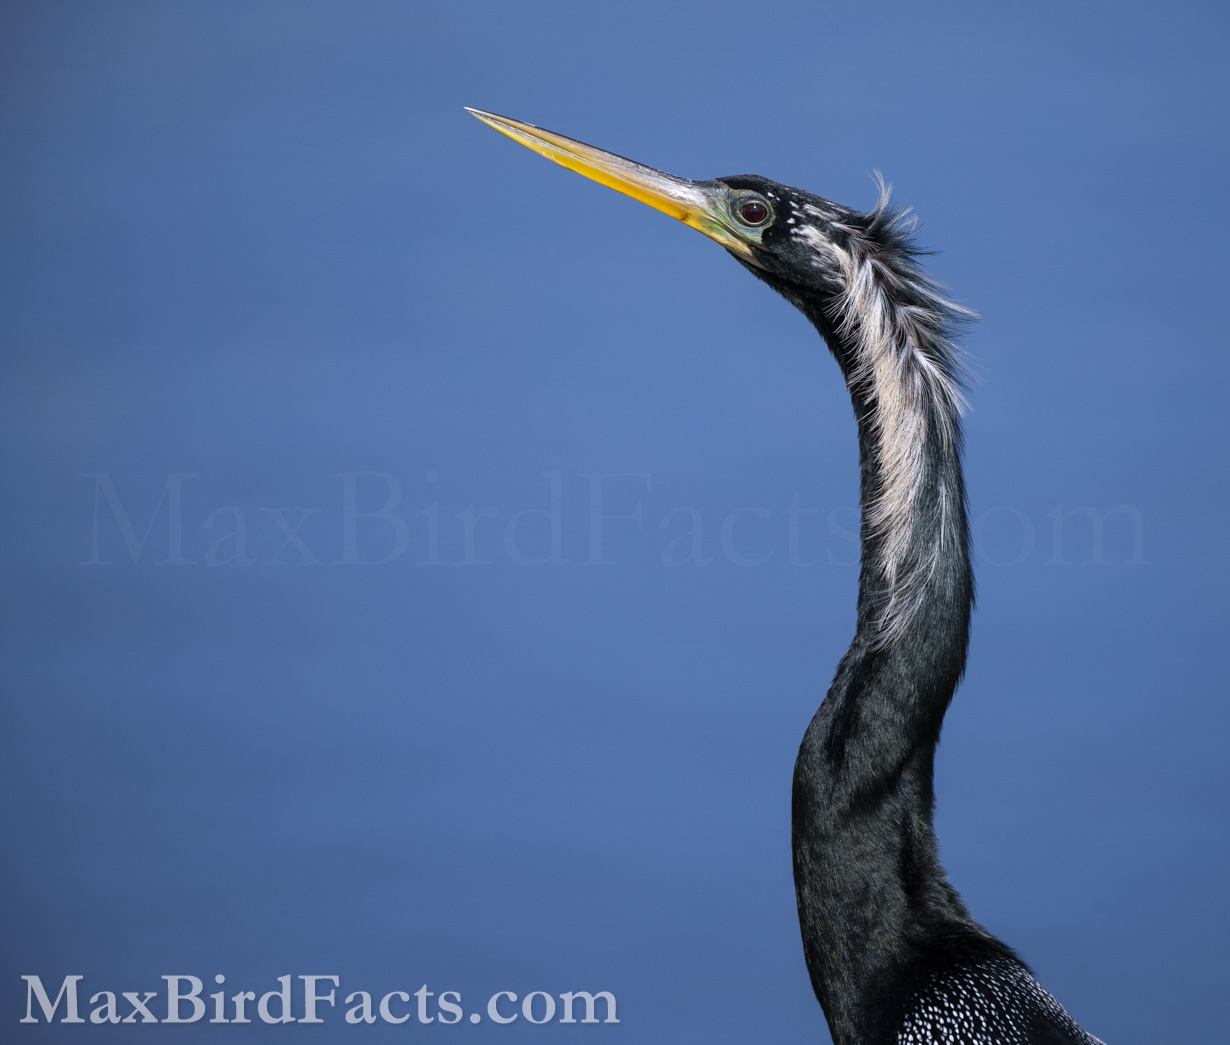 This beautiful male Anhinga is in its transitional phase, entering its breeding plumage. Along with its white feathers and bluish-green facial skin, the overall aspect of the male Anhinga becomes much more dynamic. Outside of its breeding cycle, the plumage of the male Anhinga is more flat-black. However, its feathers take on a shiny, iridescent vibrance when the breeding season begins. We can see this near the curve of this bird’s neck, where the white feathers end, where a bluish sheen is visible. (Christmas, FL. 2020)
Anhinga_vs_Cormorant_anhinga_male_profile